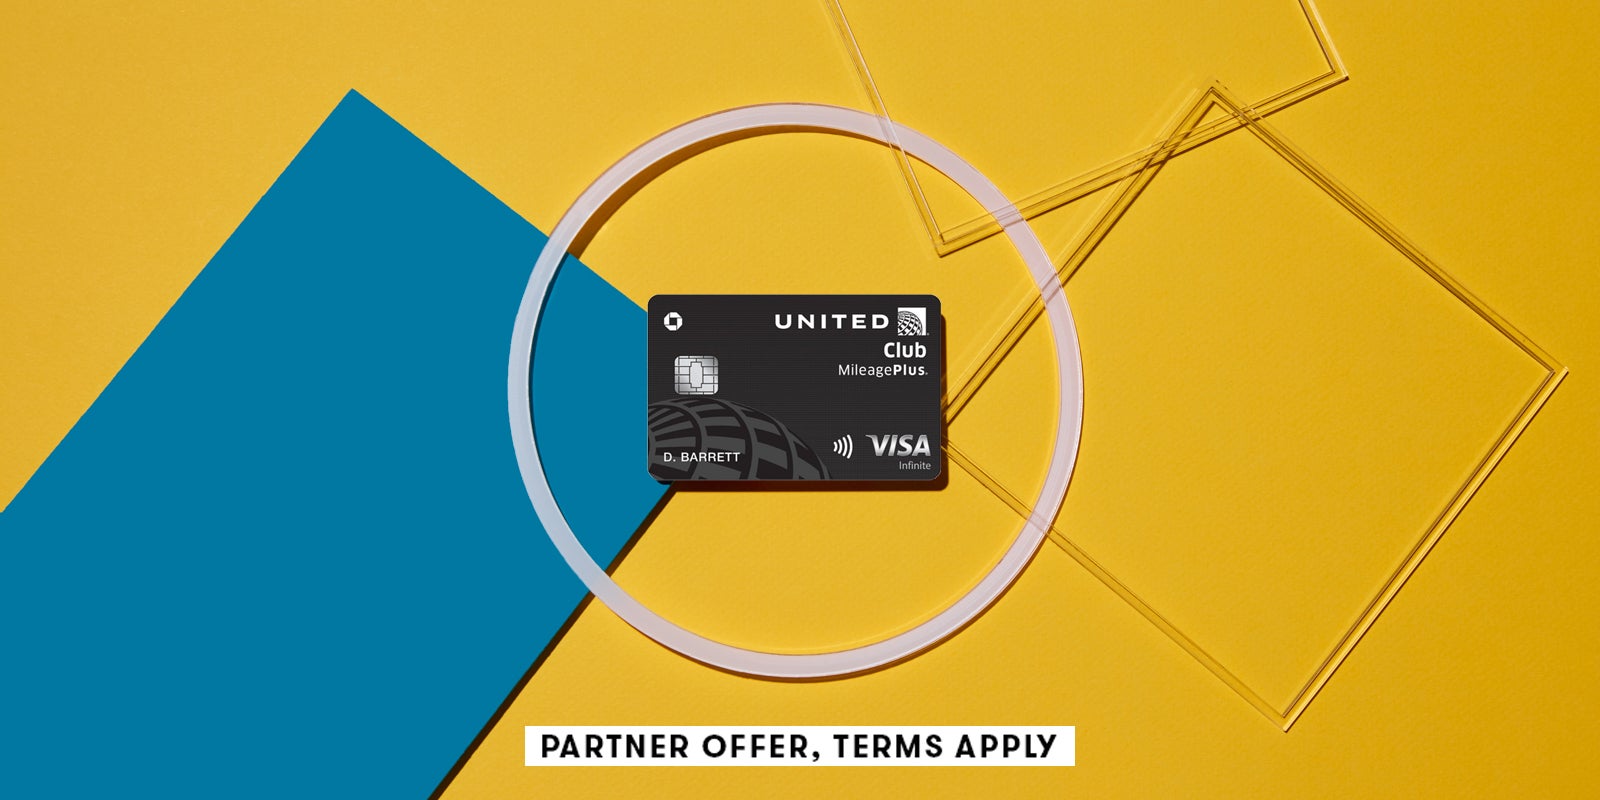 1. United Club Infinite Card Overview